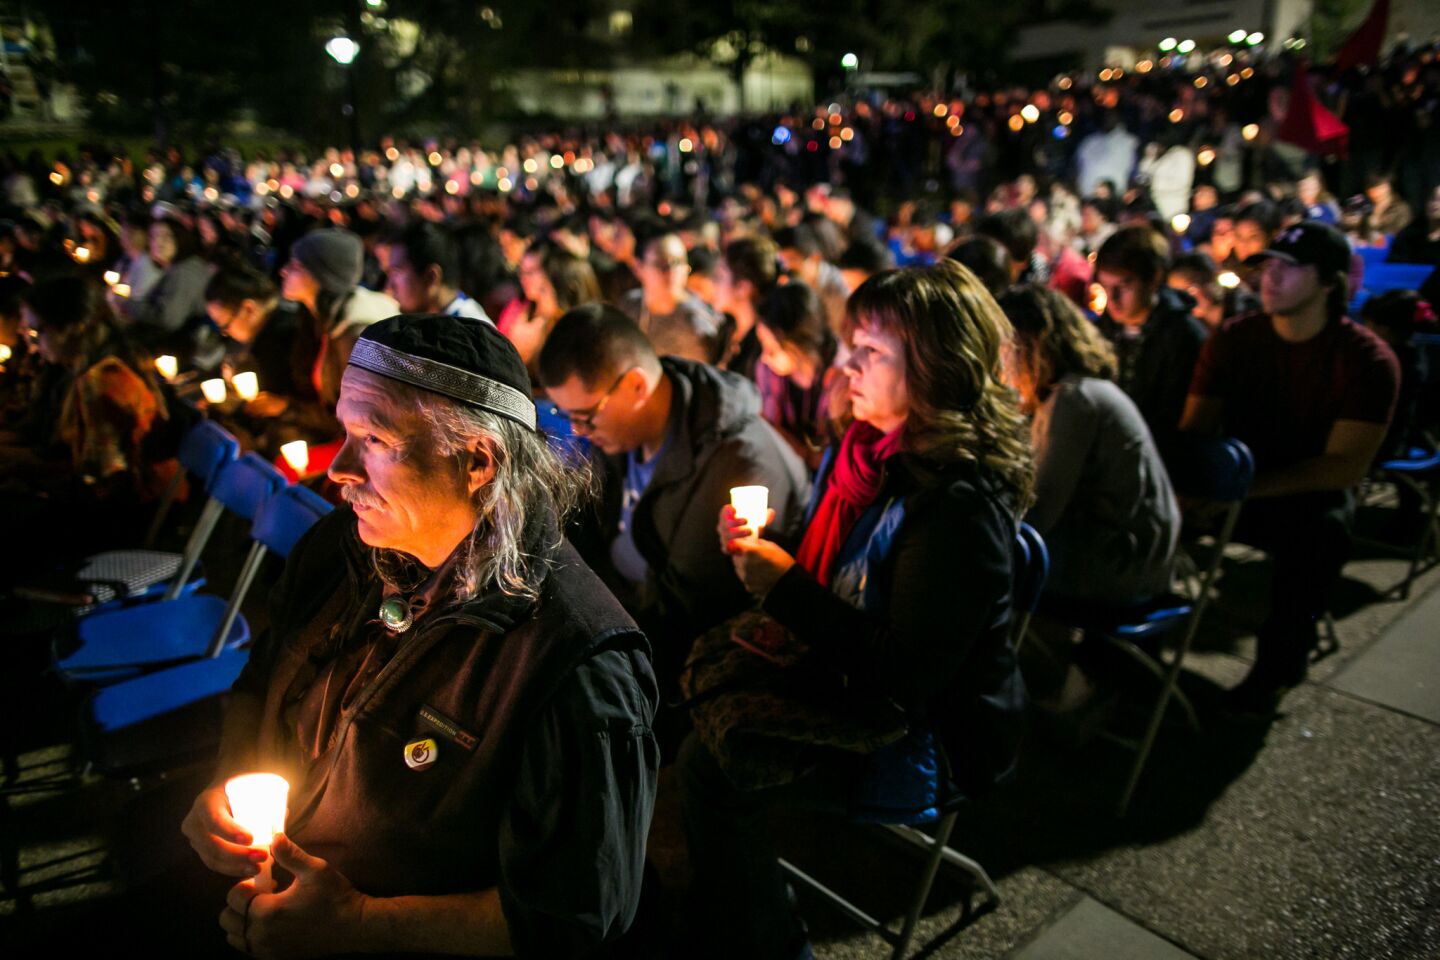 Community members and students gather for a Dec. 7 vigil on the Cal State San Bernardino campus to remember the victims of the deadly attack in the city.